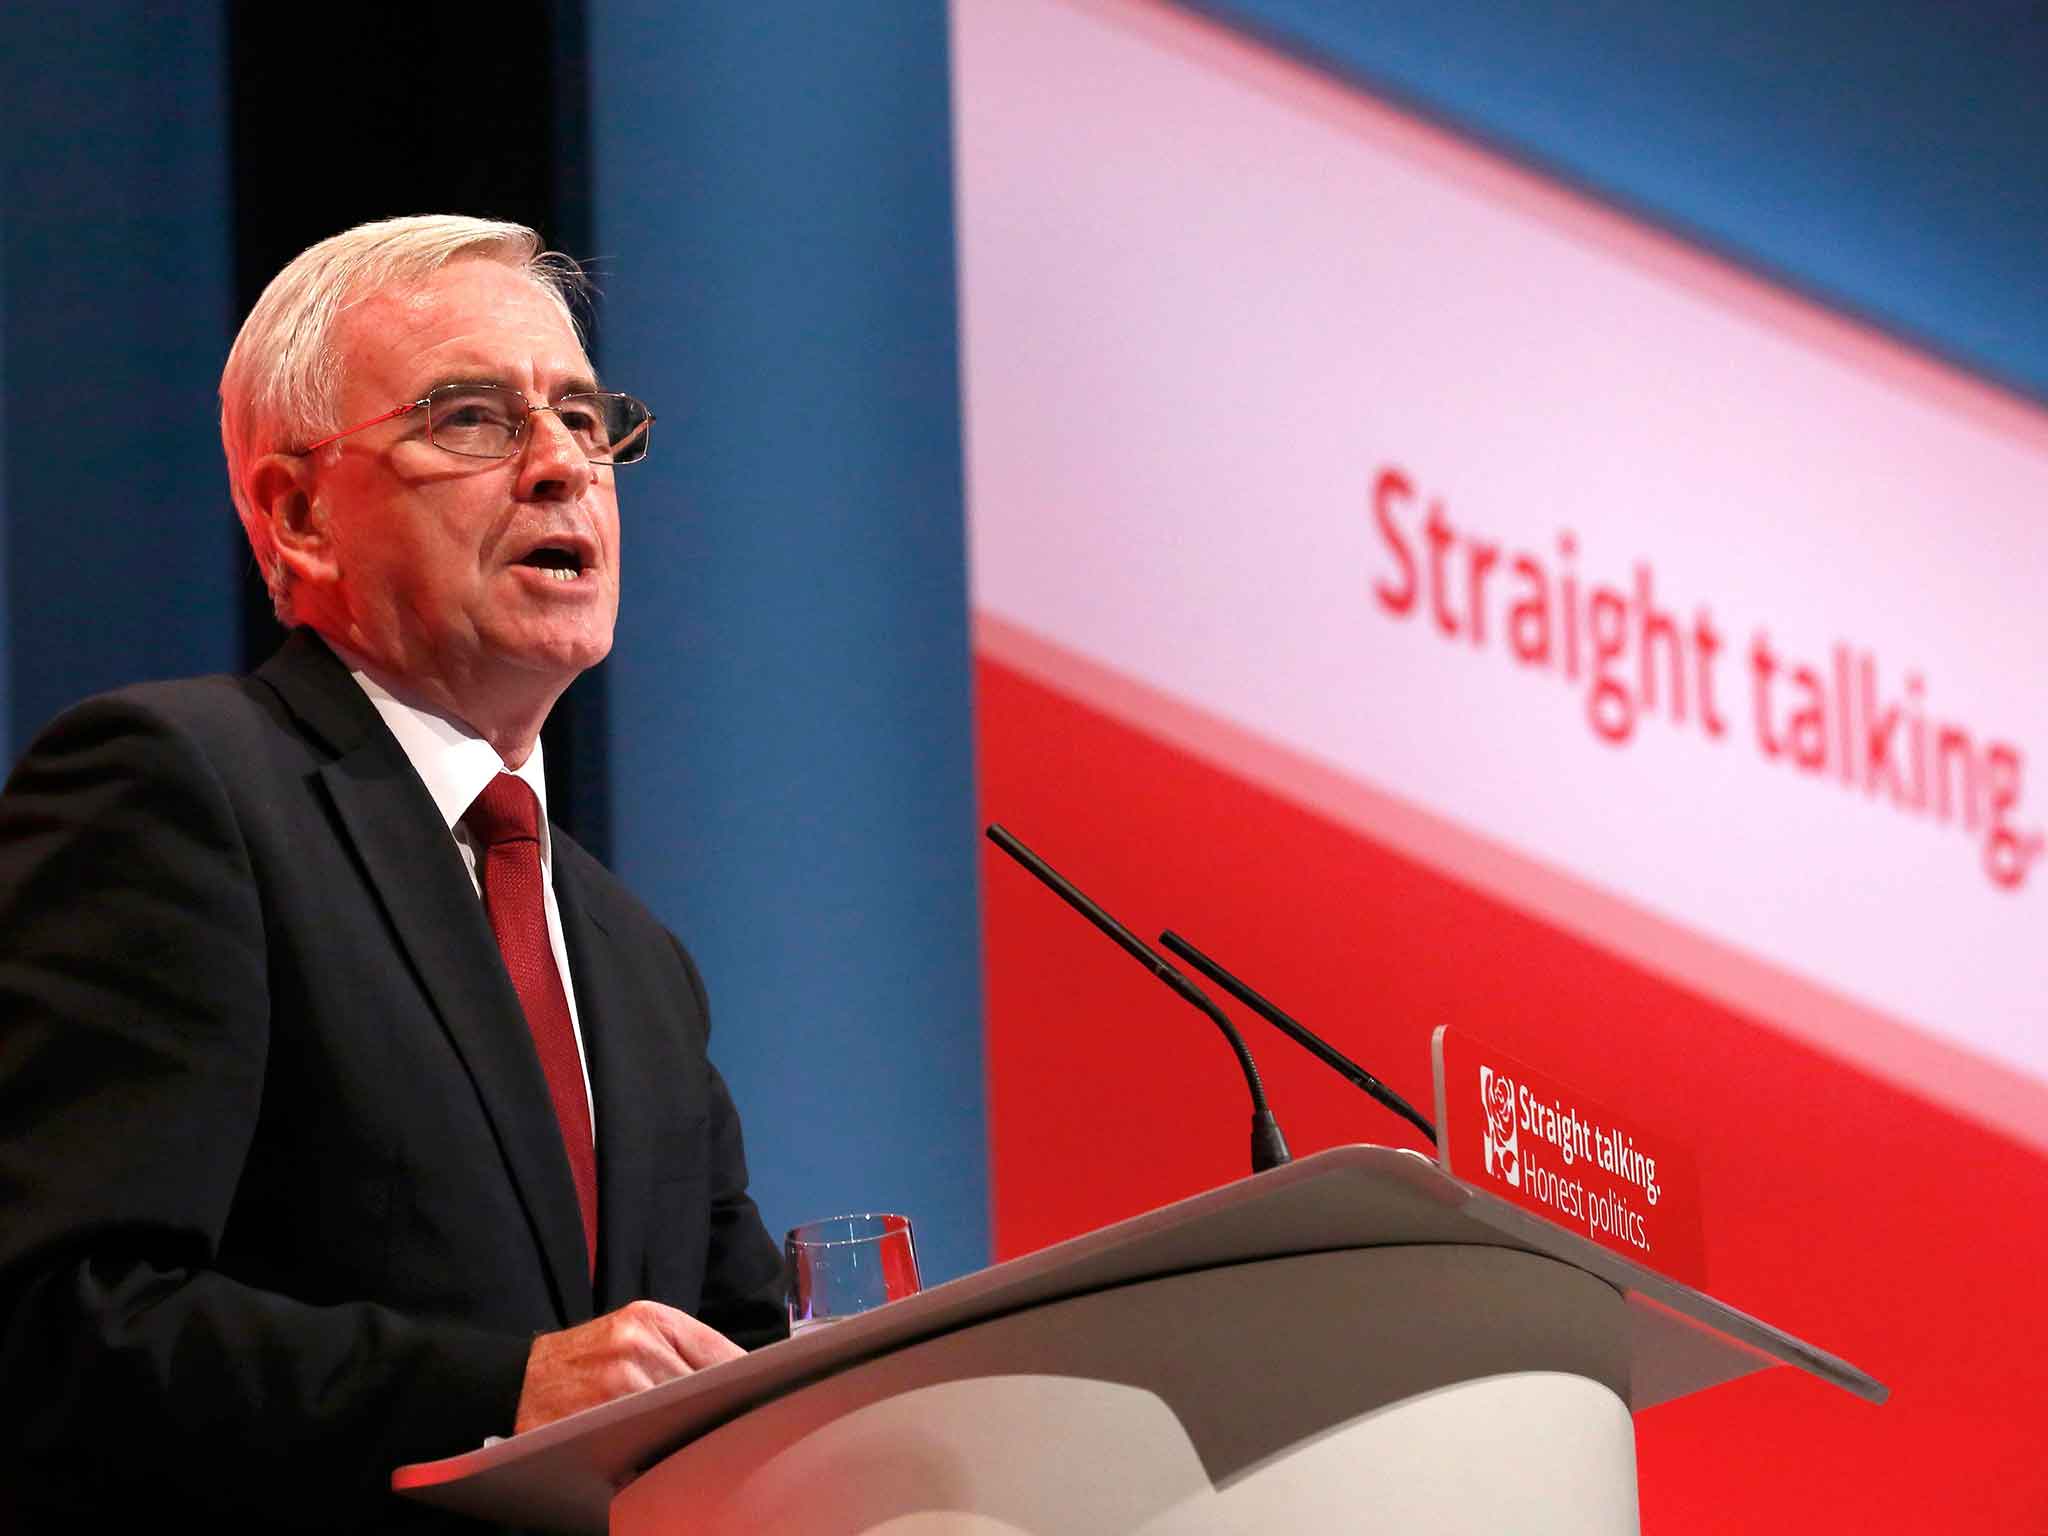 John McDonnell laid out in detail how he and Jeremy Corbyn plans to restore trust in Labour’s economic policy